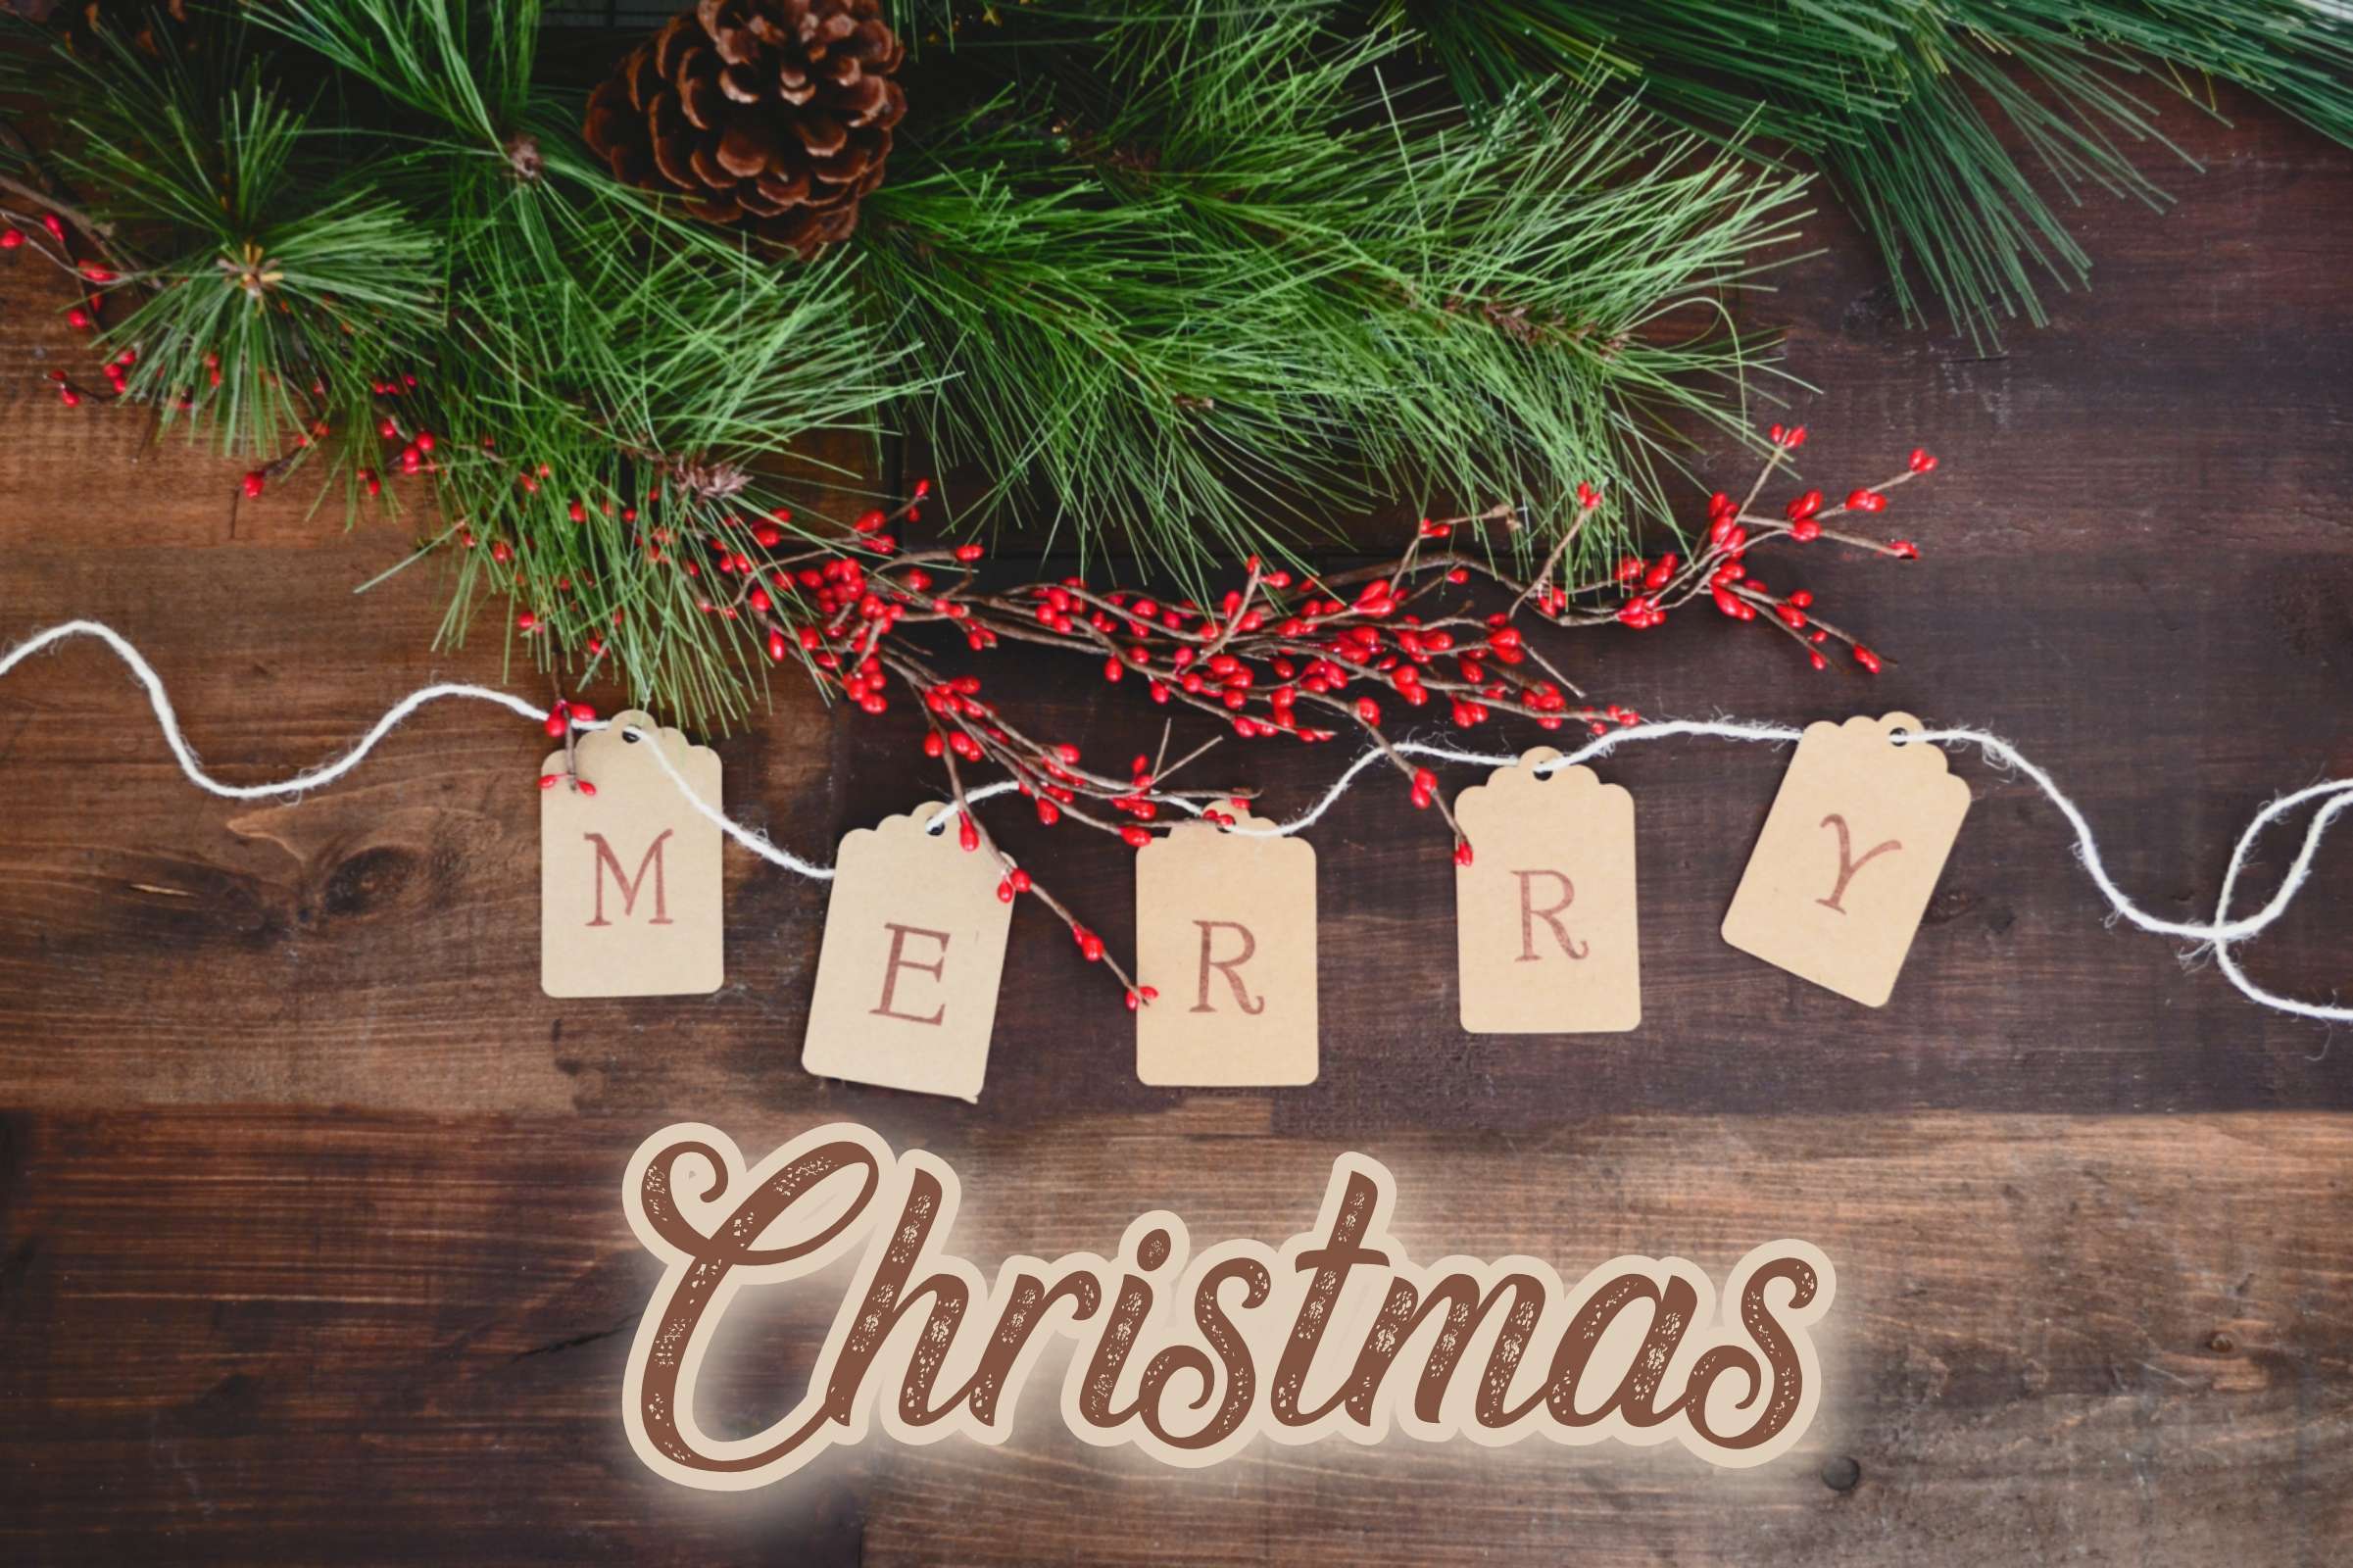 Merry Christmas Images 2021 Free Download